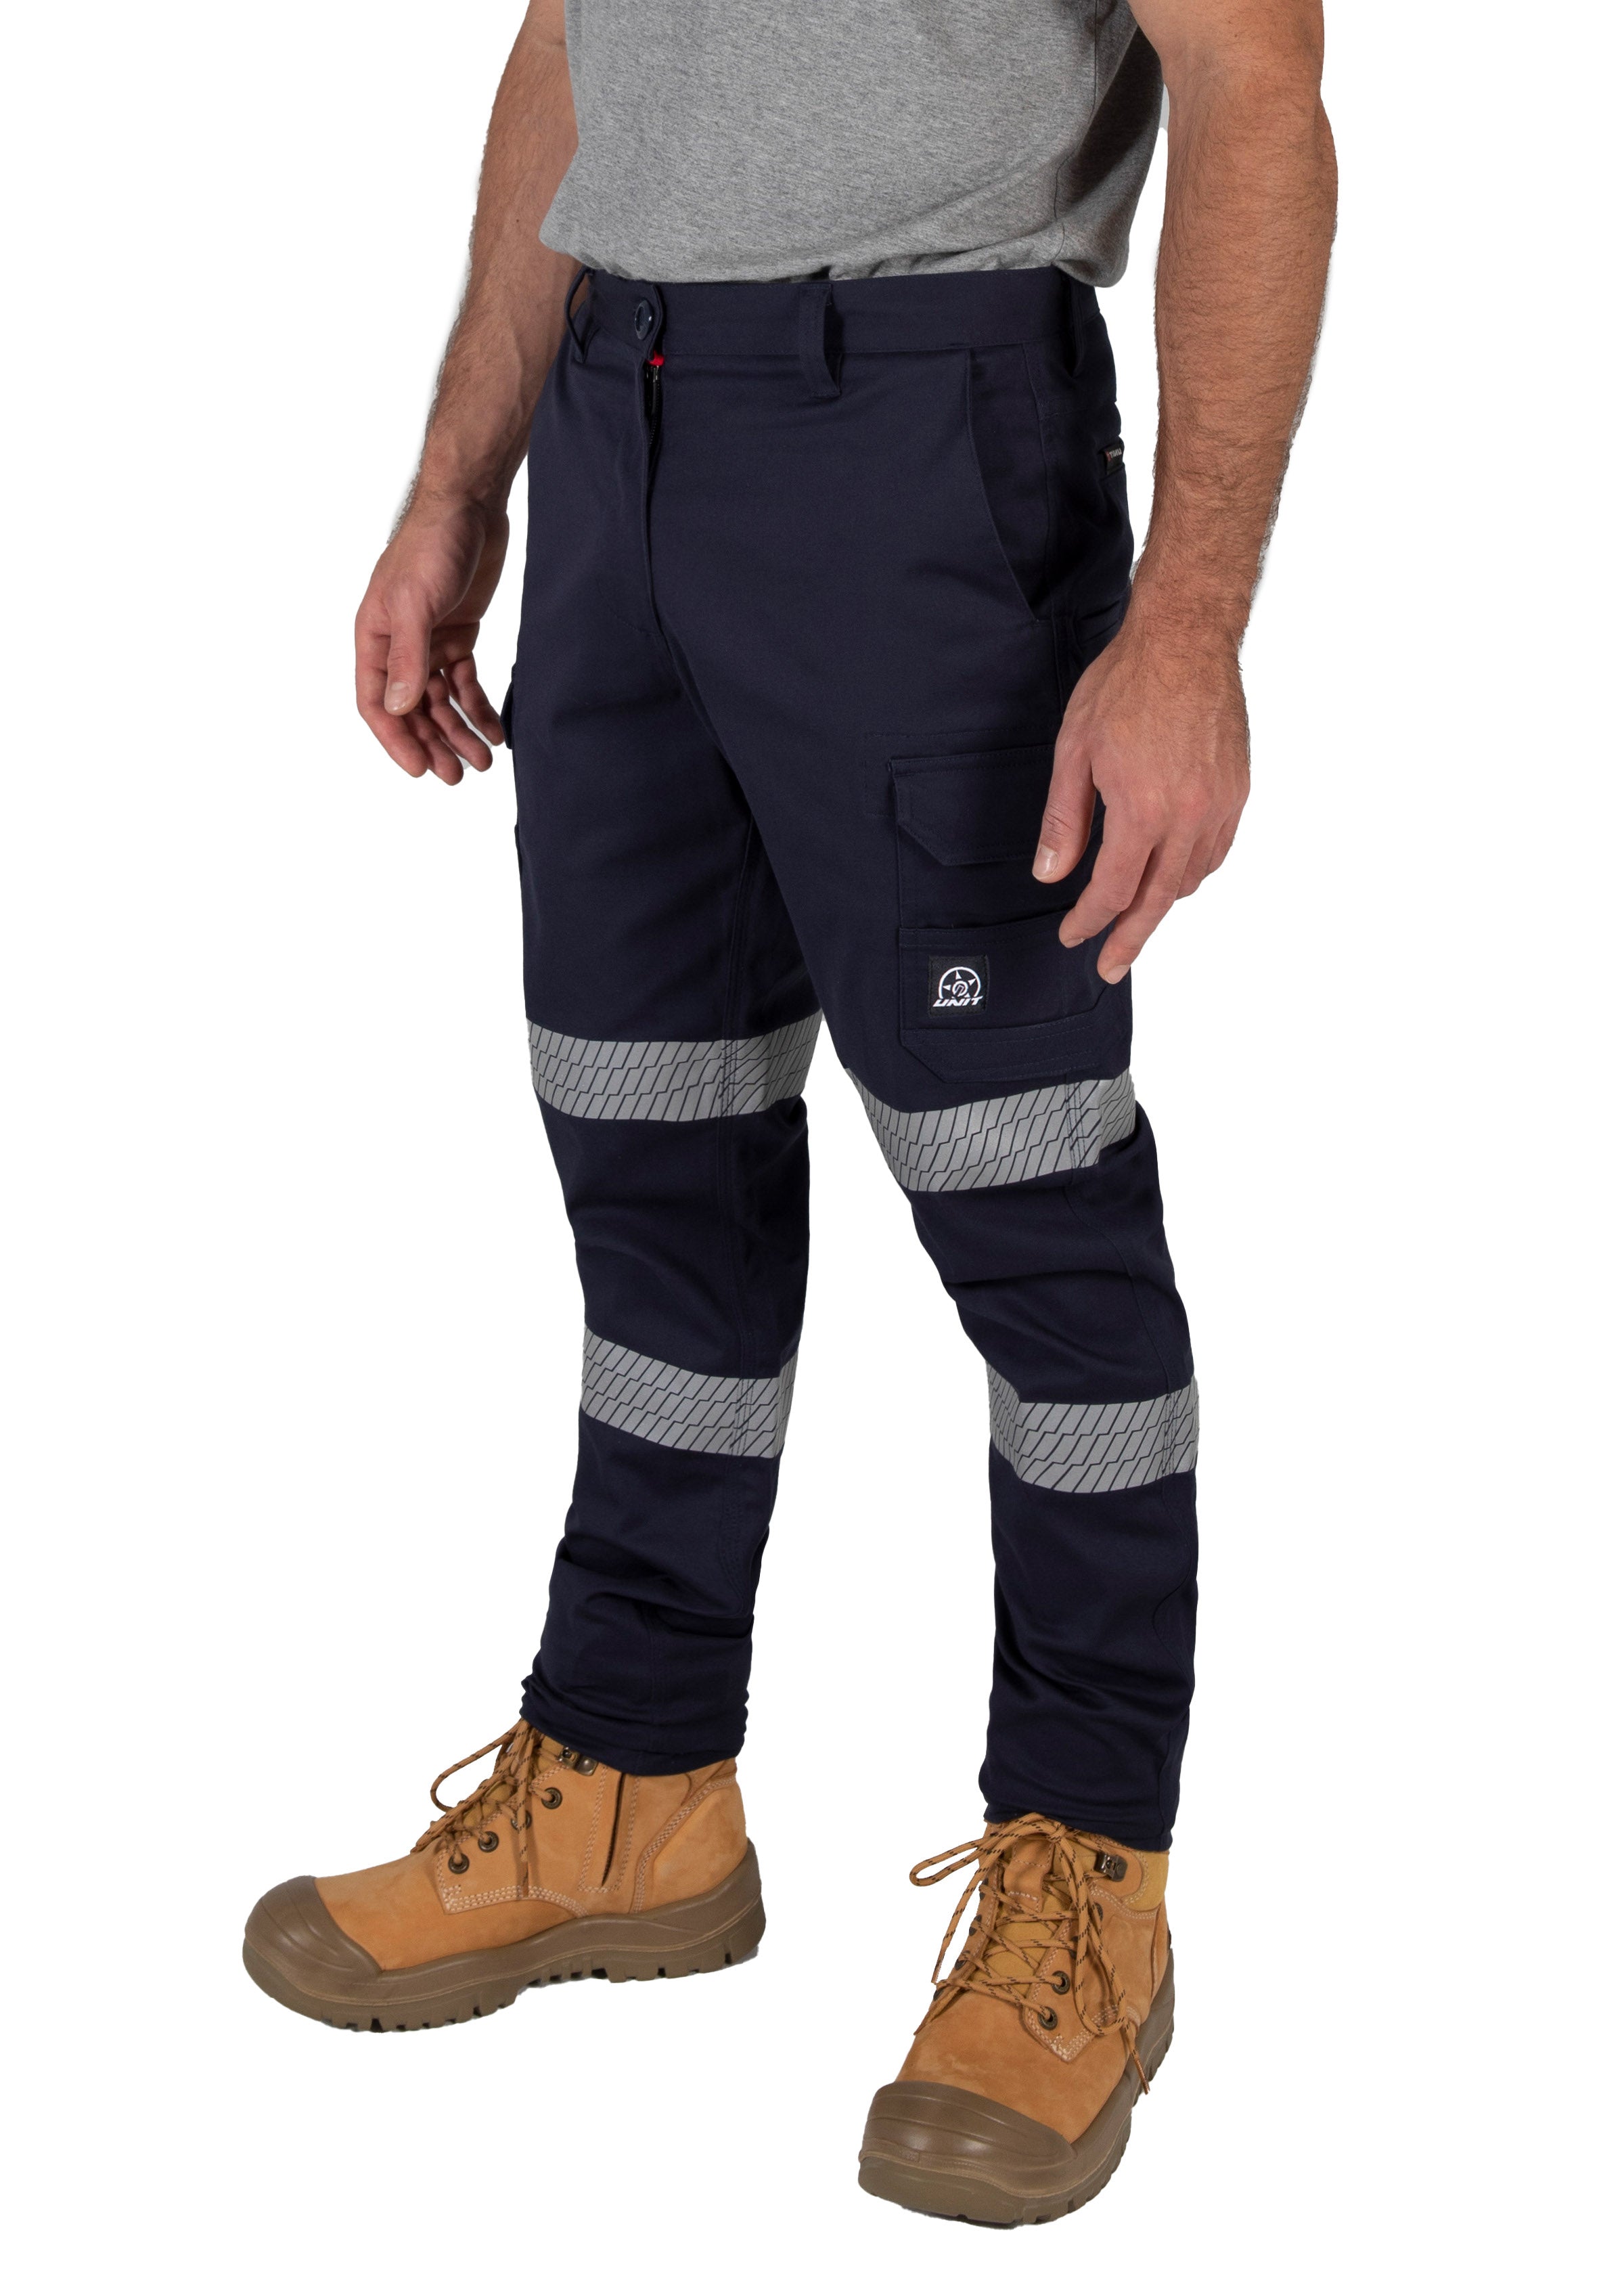 FXD WP3T STRETCH REFLECTIVE TAPE WORK PANTS – Safety Wear